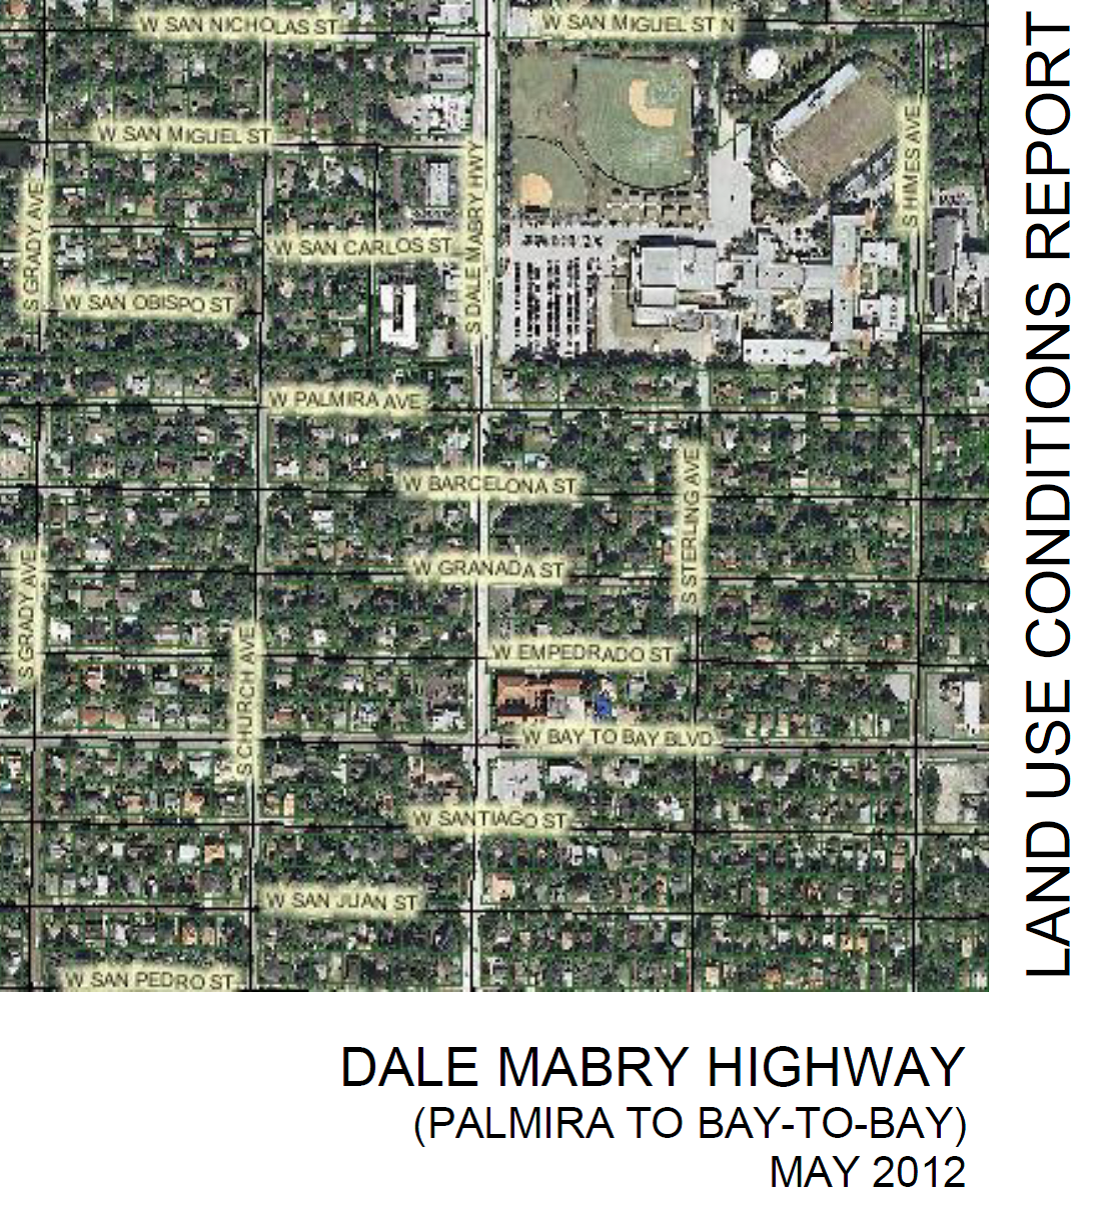 Dale Mabry (Palmira to Bay-to-Bay) Land Use Conditions Study